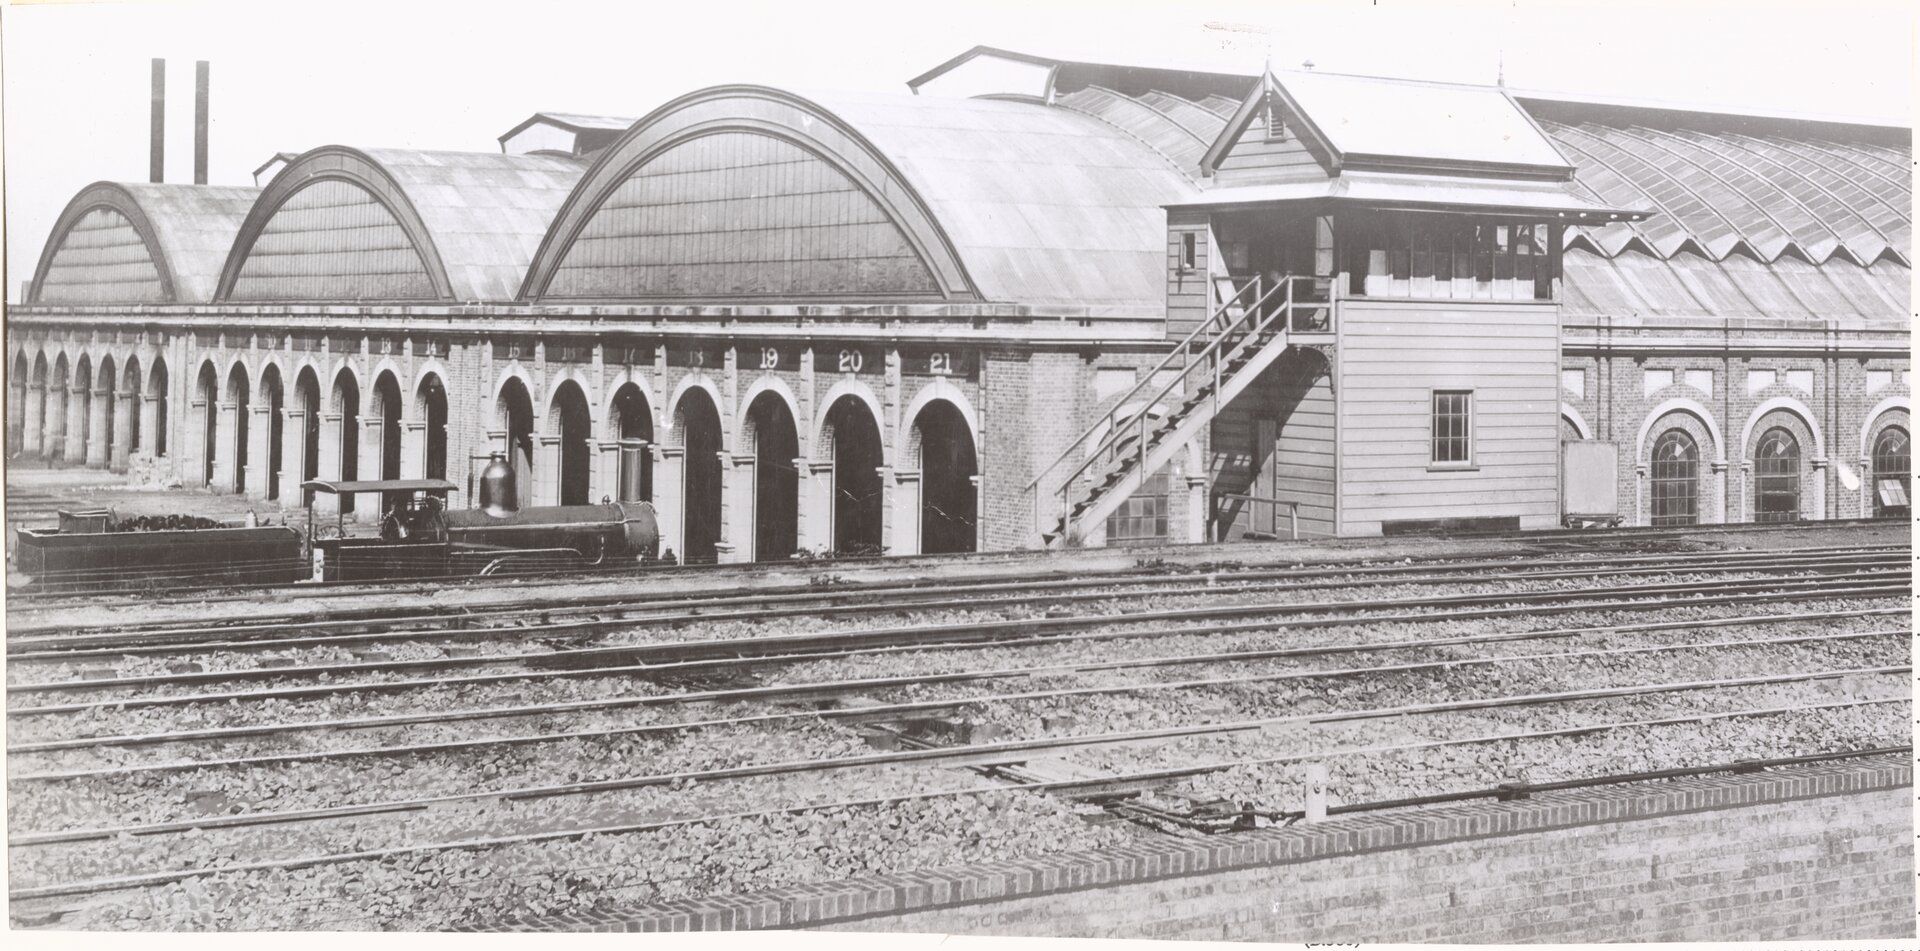 Black and white photo of Eveleigh depot